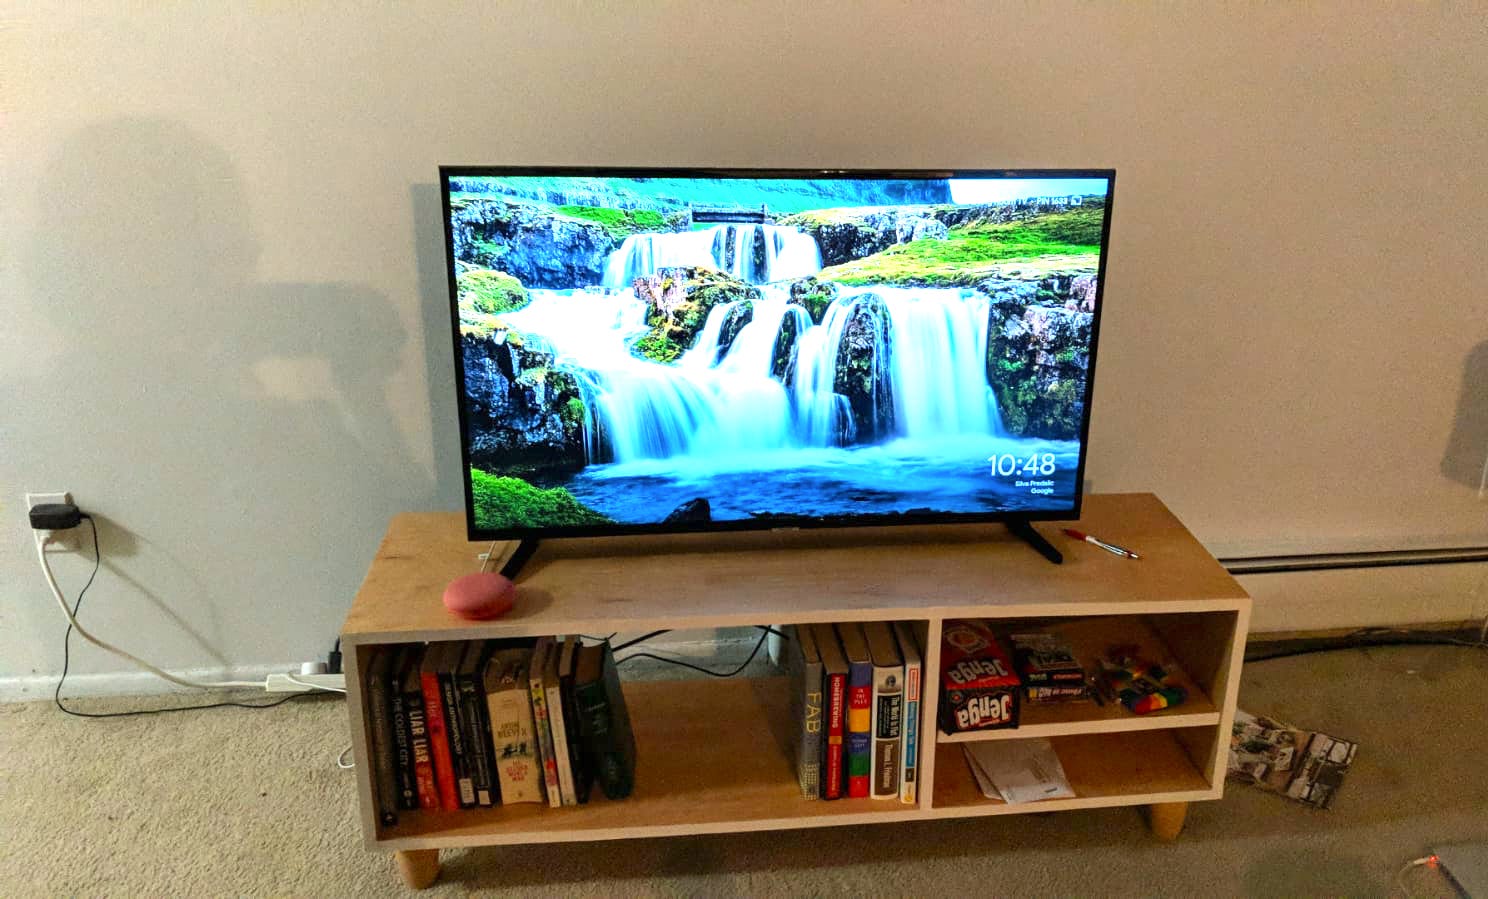 TV and books placed, console is ready to be used